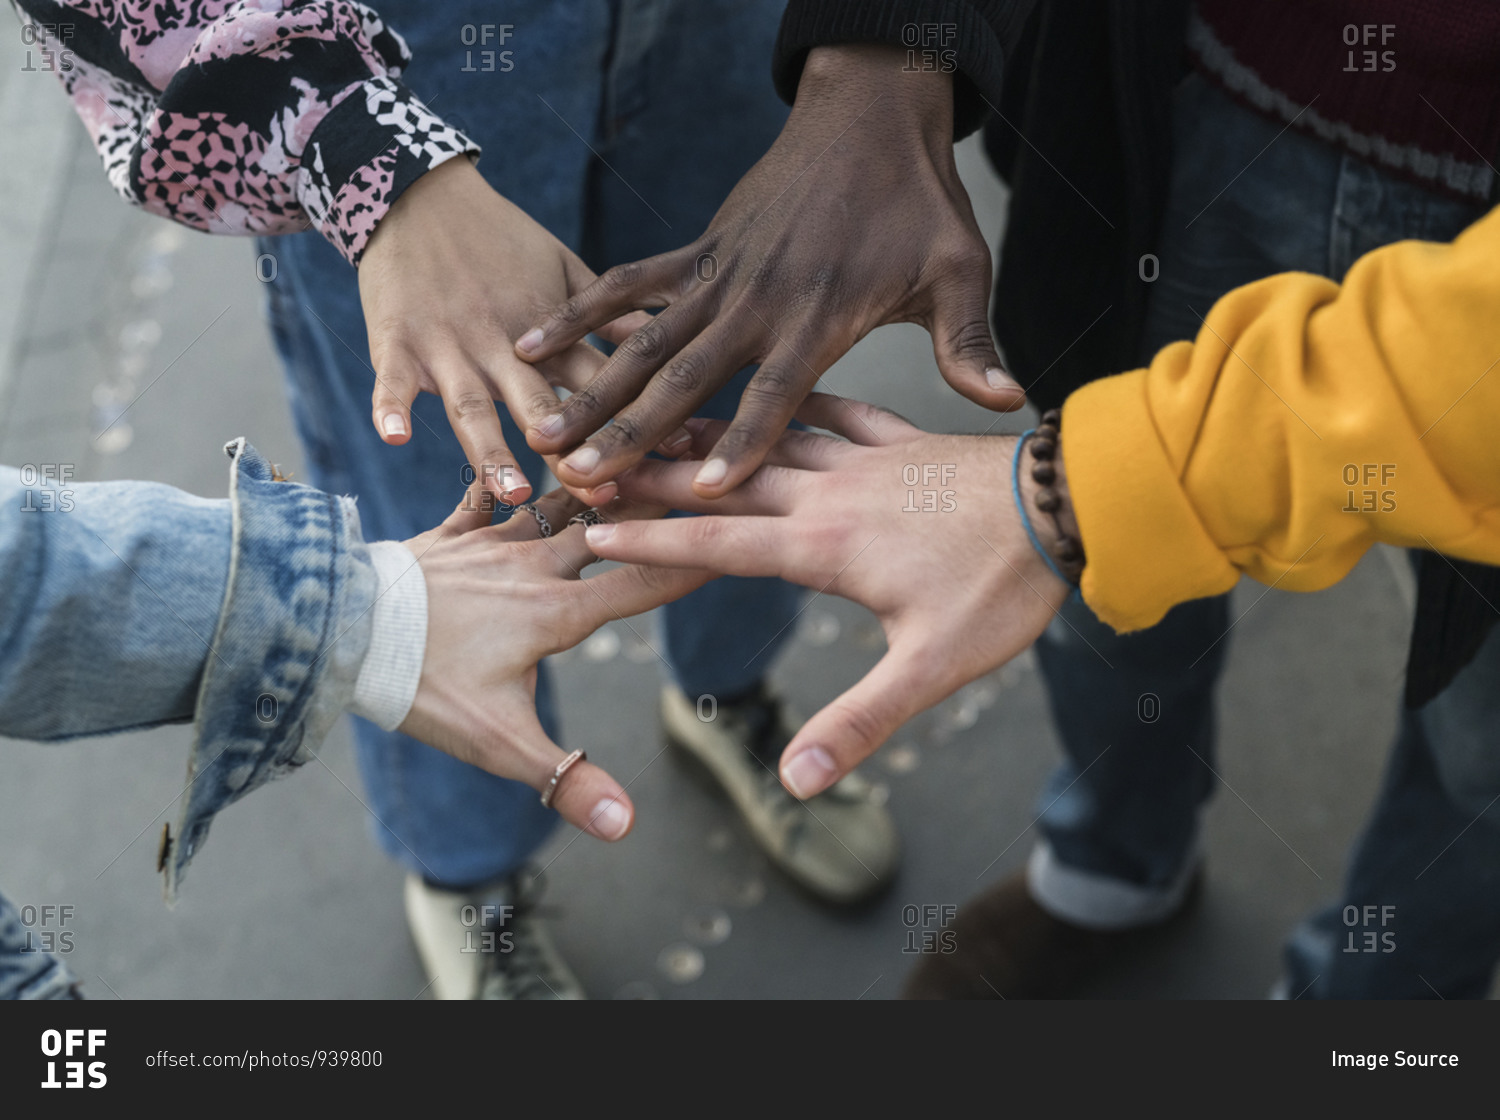 Four female and male young adult friends bringing hands together, close up of hands